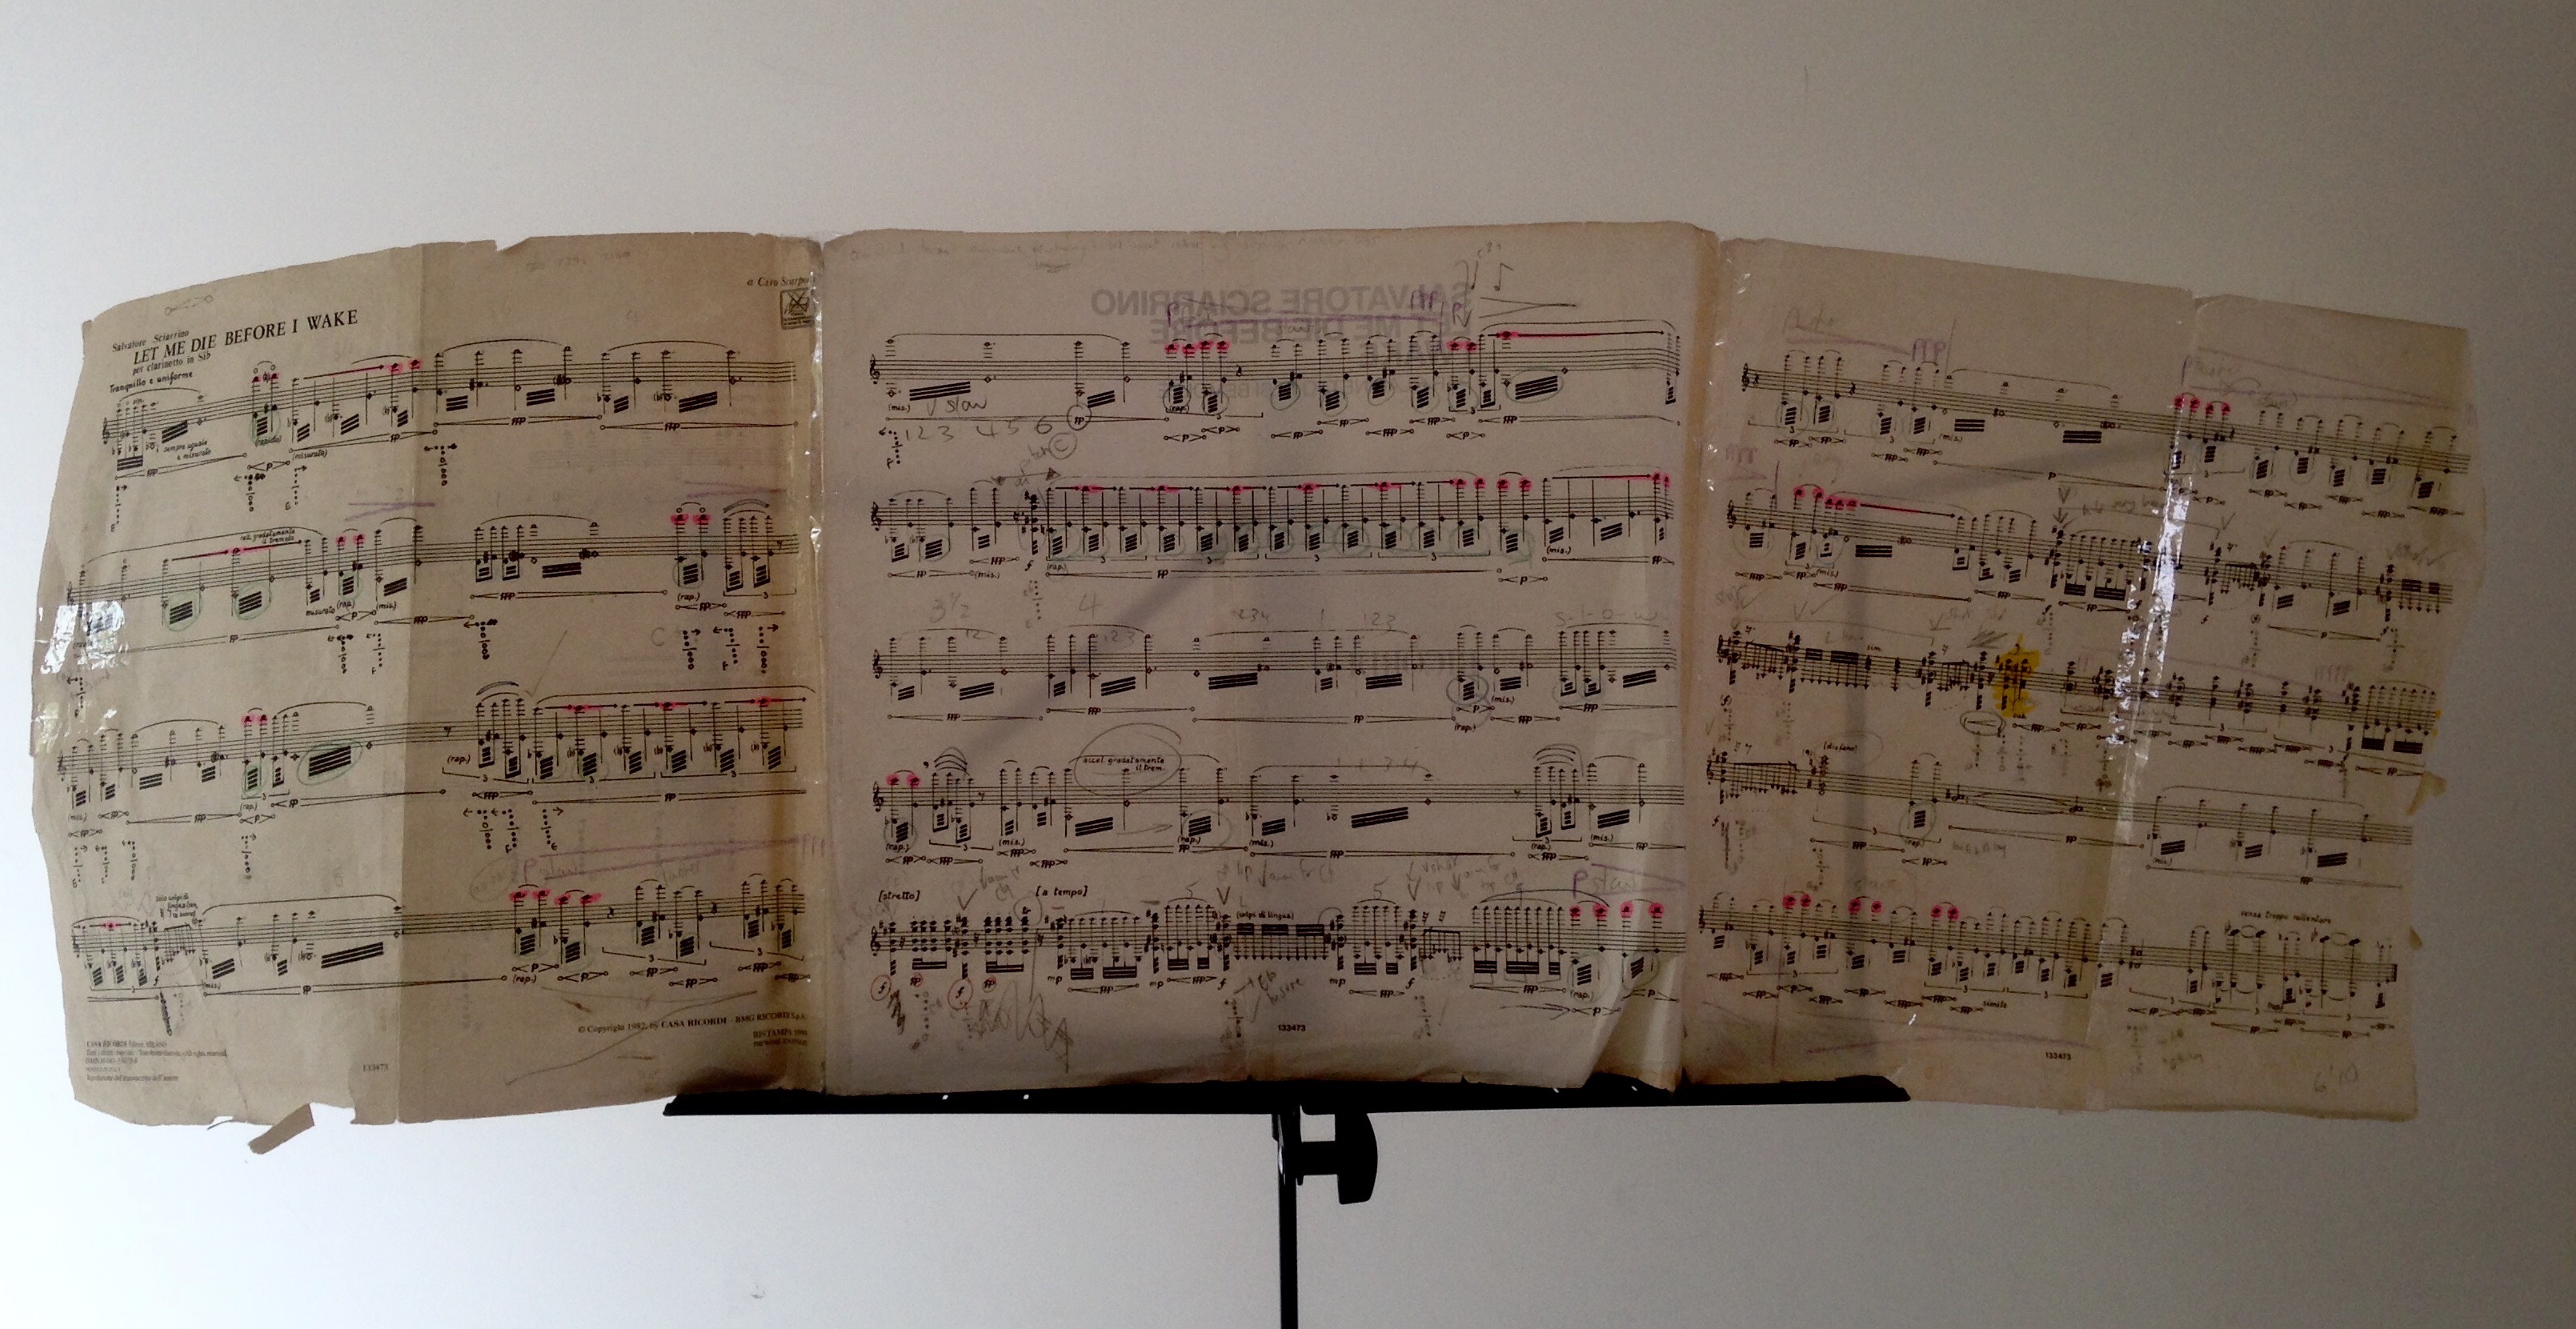 A beautiful landscape:  the well-trodden path through a much-loved score